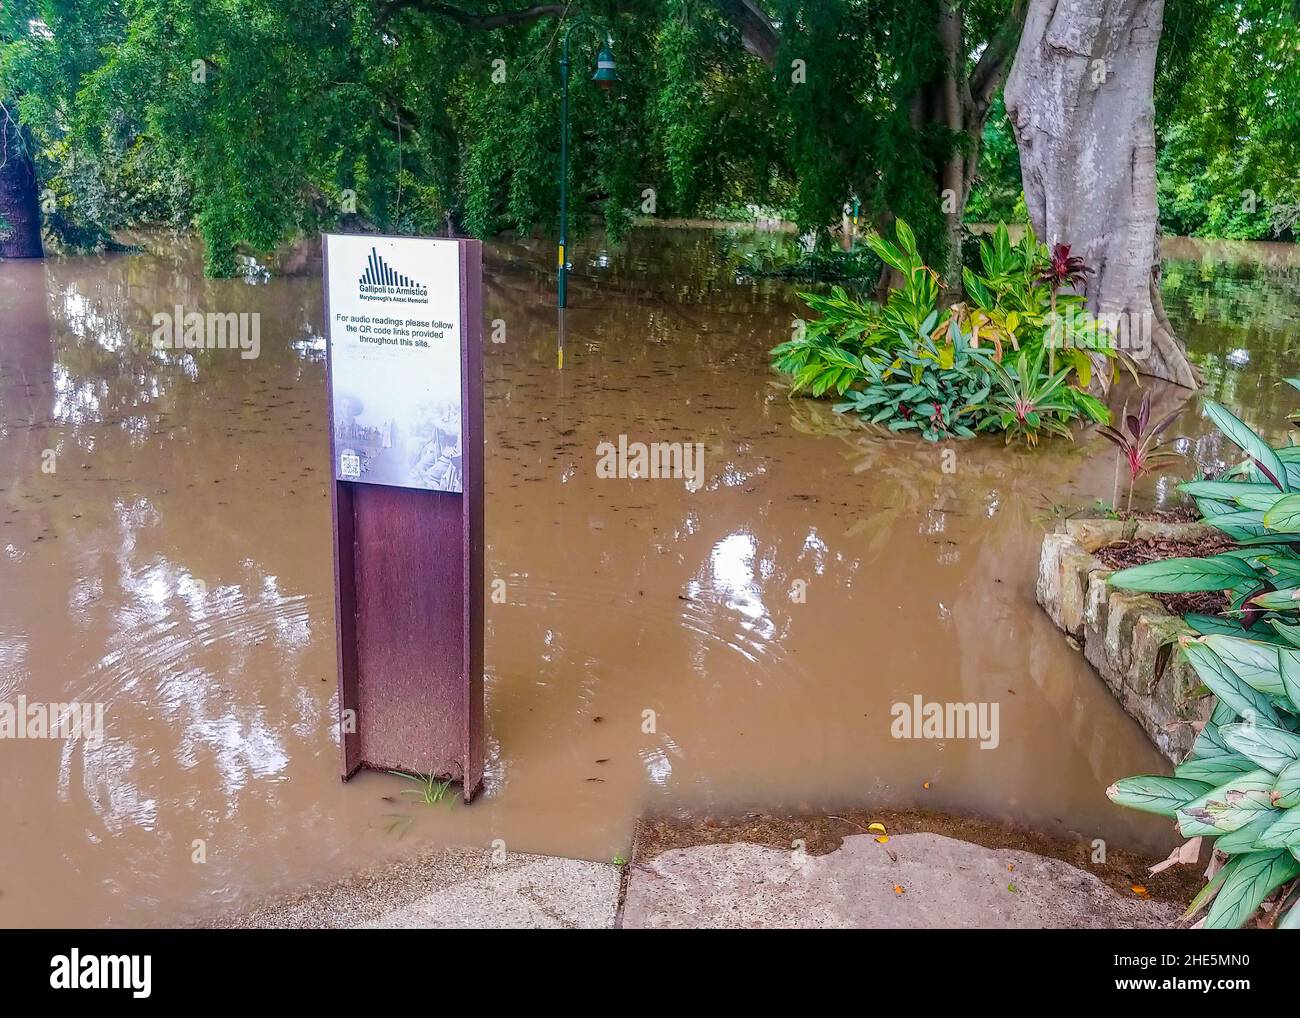 Maryborough, QLD, 9 Jan, 2021: Flood waters from Mary River inundate Queens Park and surround a signpost, part of the interactive Queens Park Military Stock Photo